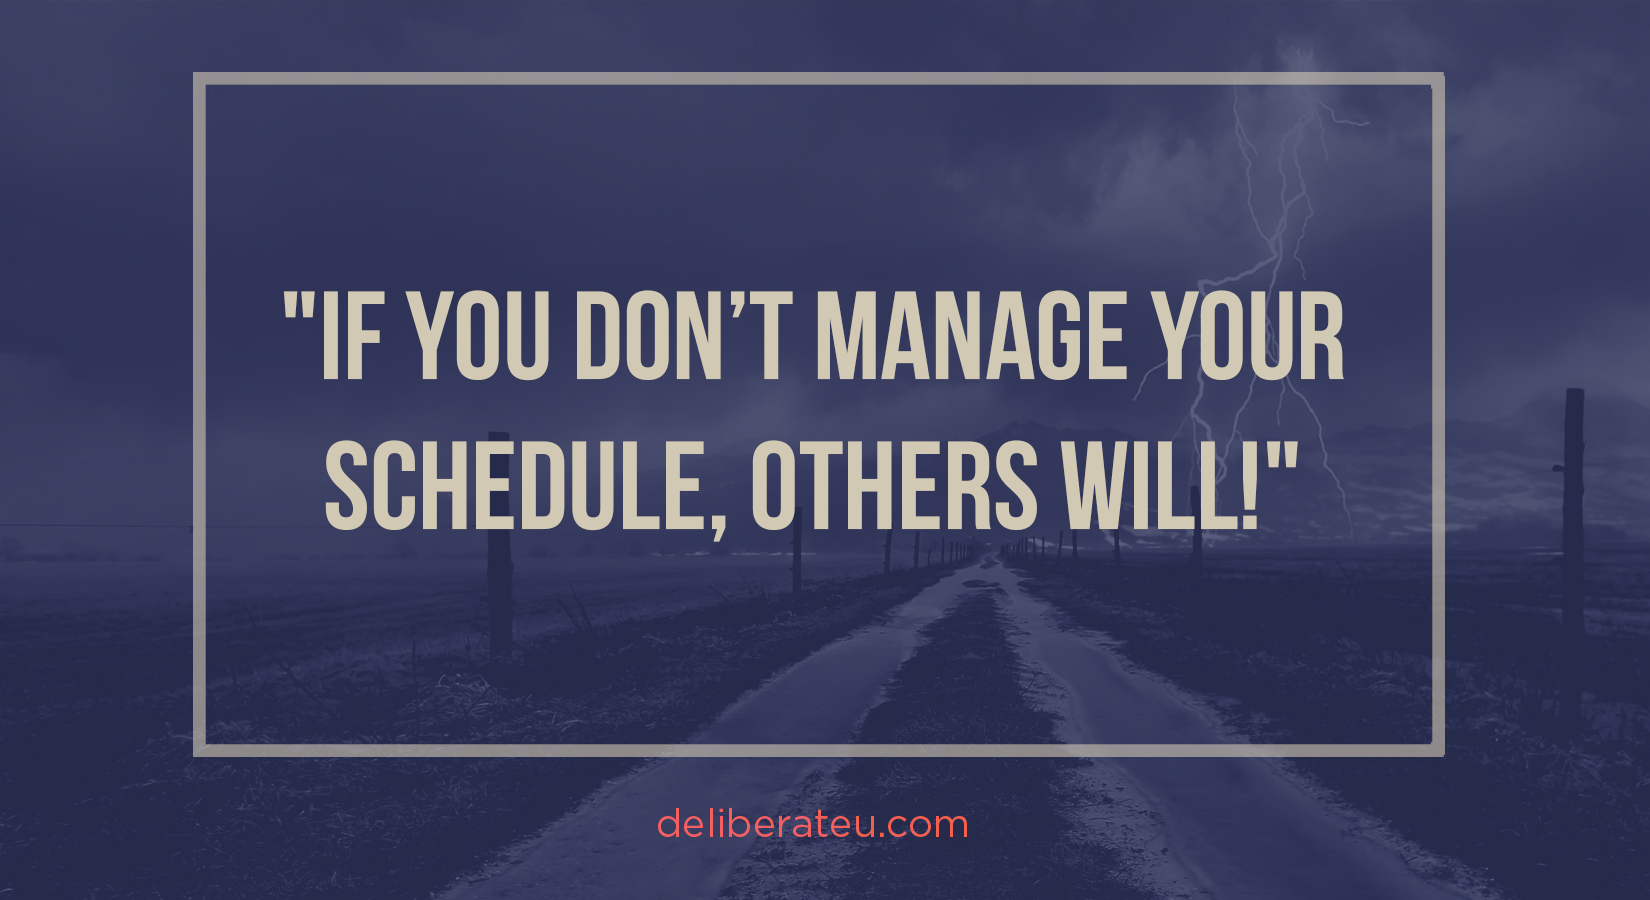 Managing-Schedule-others-will.jpg#asset:2037